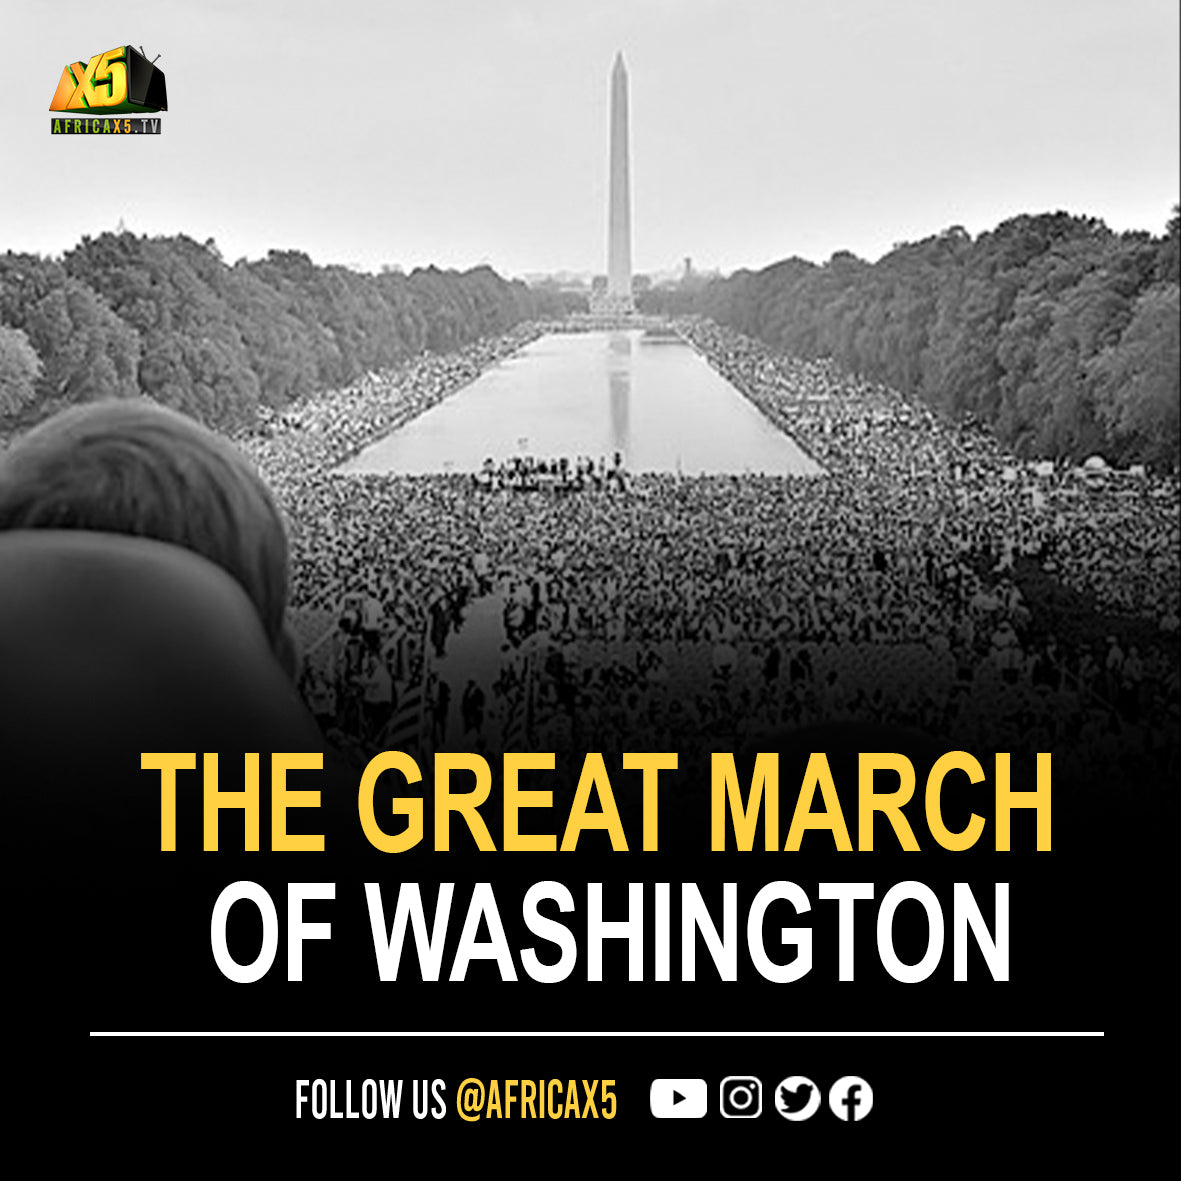 60 years ago today, The Great March on Washington, was held in Washington, D.C.